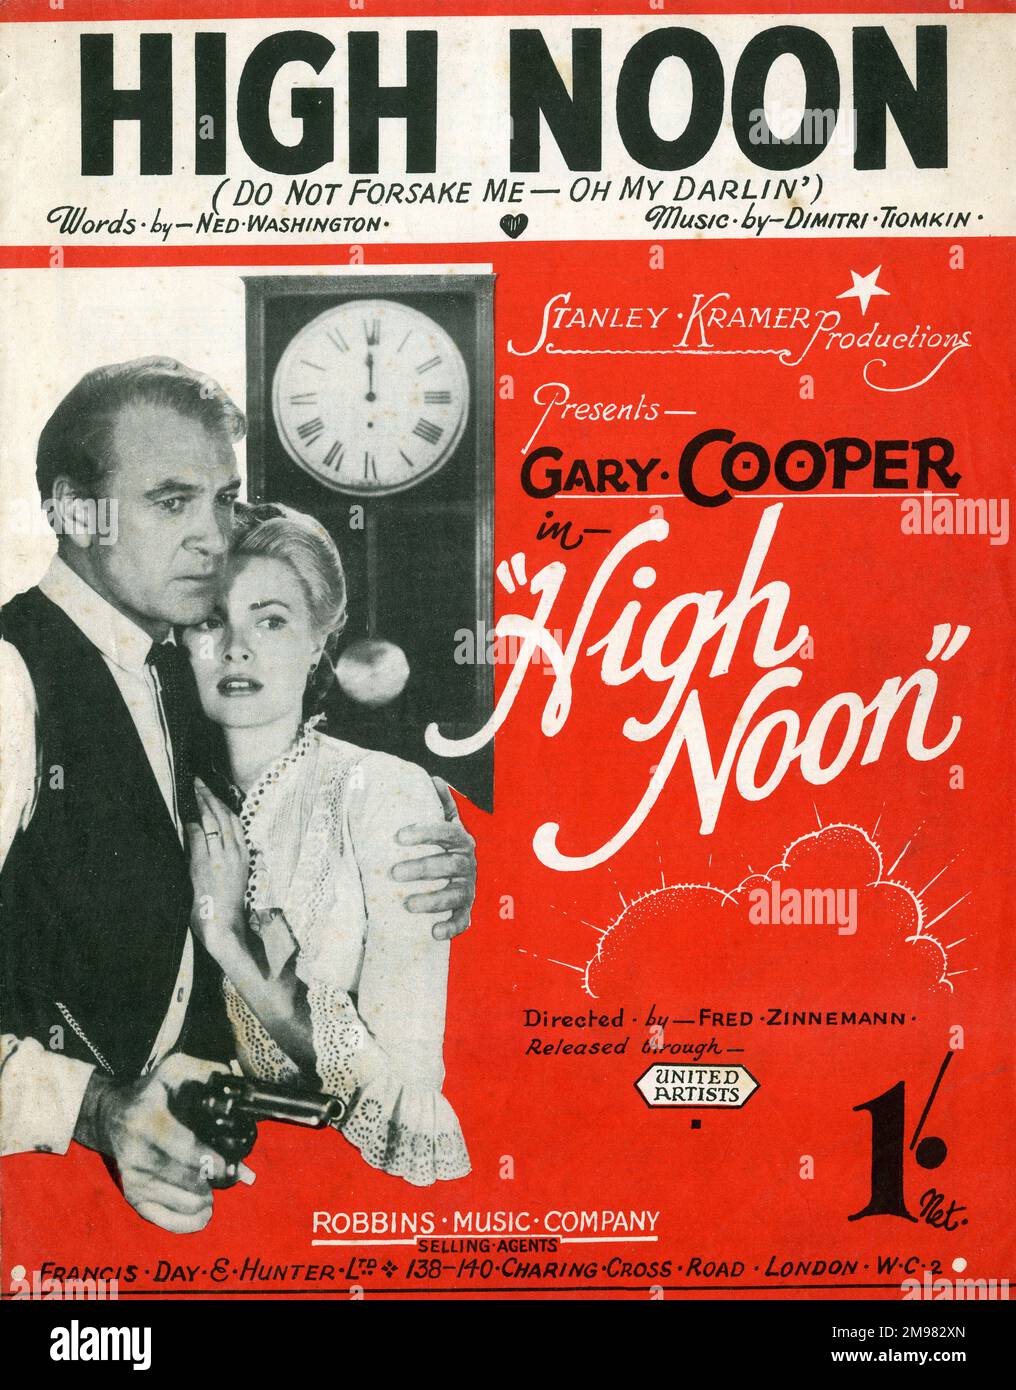 Music cover, Gary Cooper High Noon (Do Not Forsake Me Oh My Darlin'), depicting Gary Cooper and Grace Kelly in a still from the film.  Words by Ned Washington, music by Dimitri Tiomkin. Stock Photo